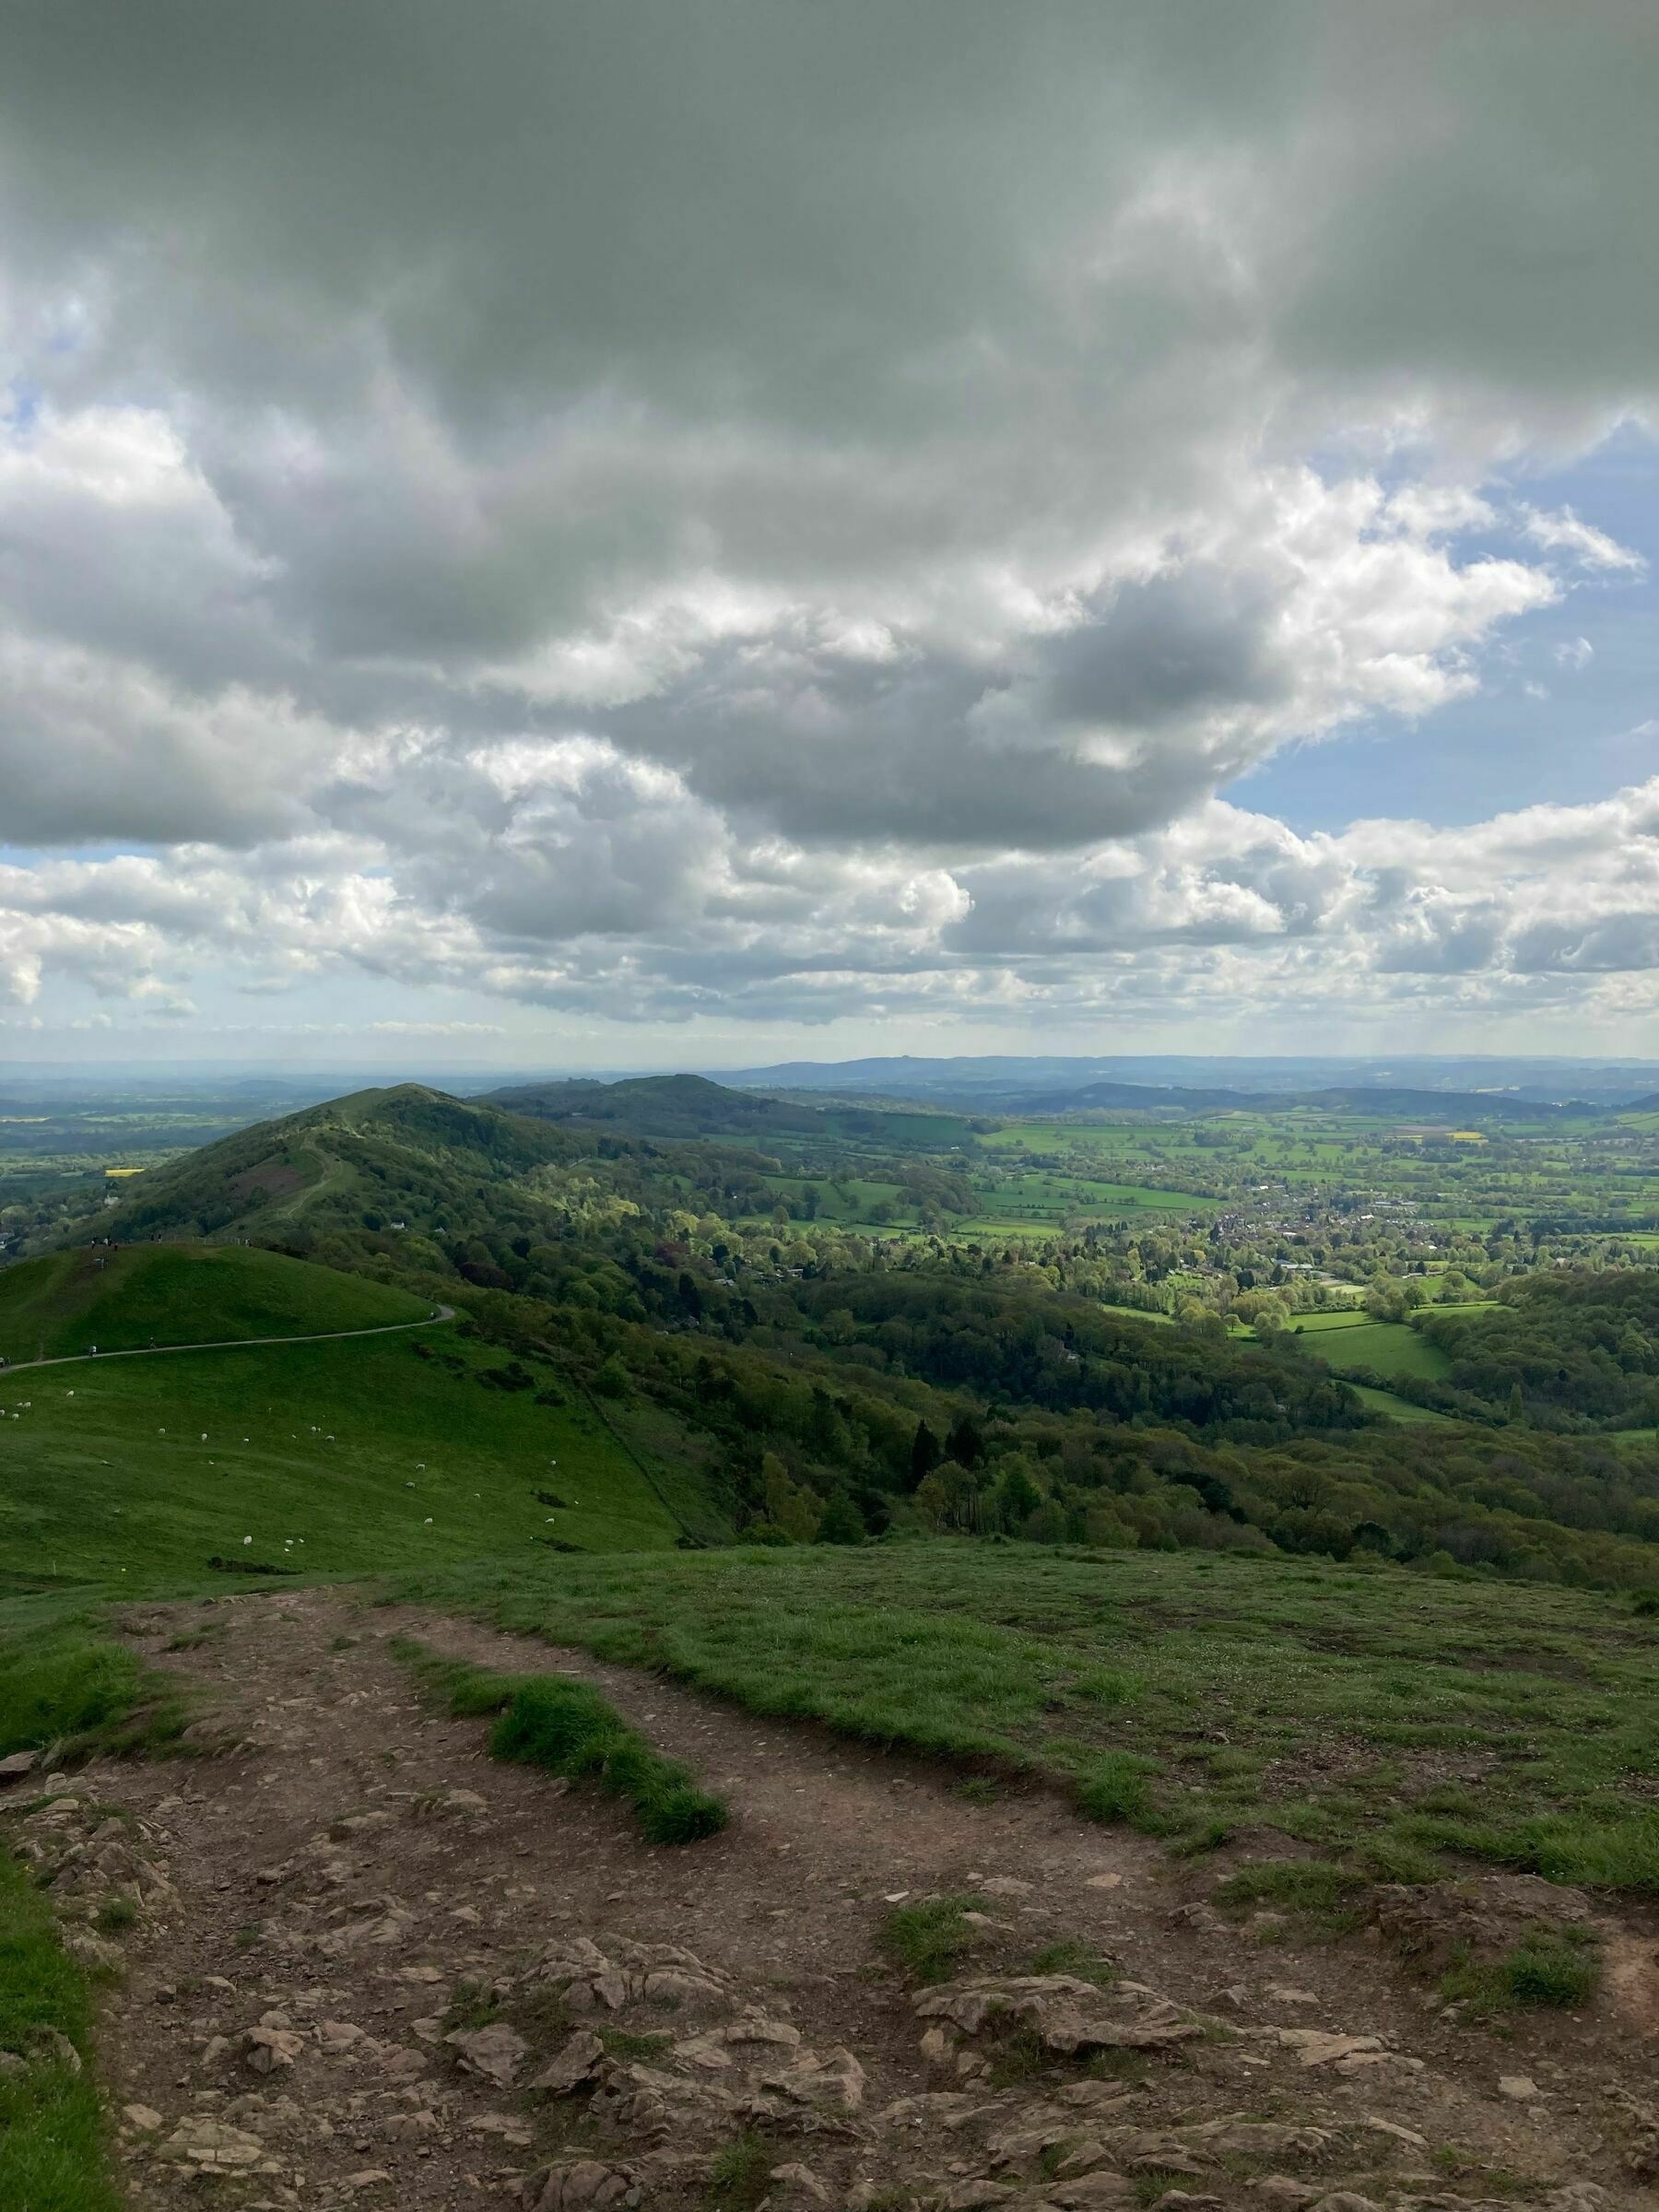 A view from the Malvern Hills looking along the ridge of the hills.